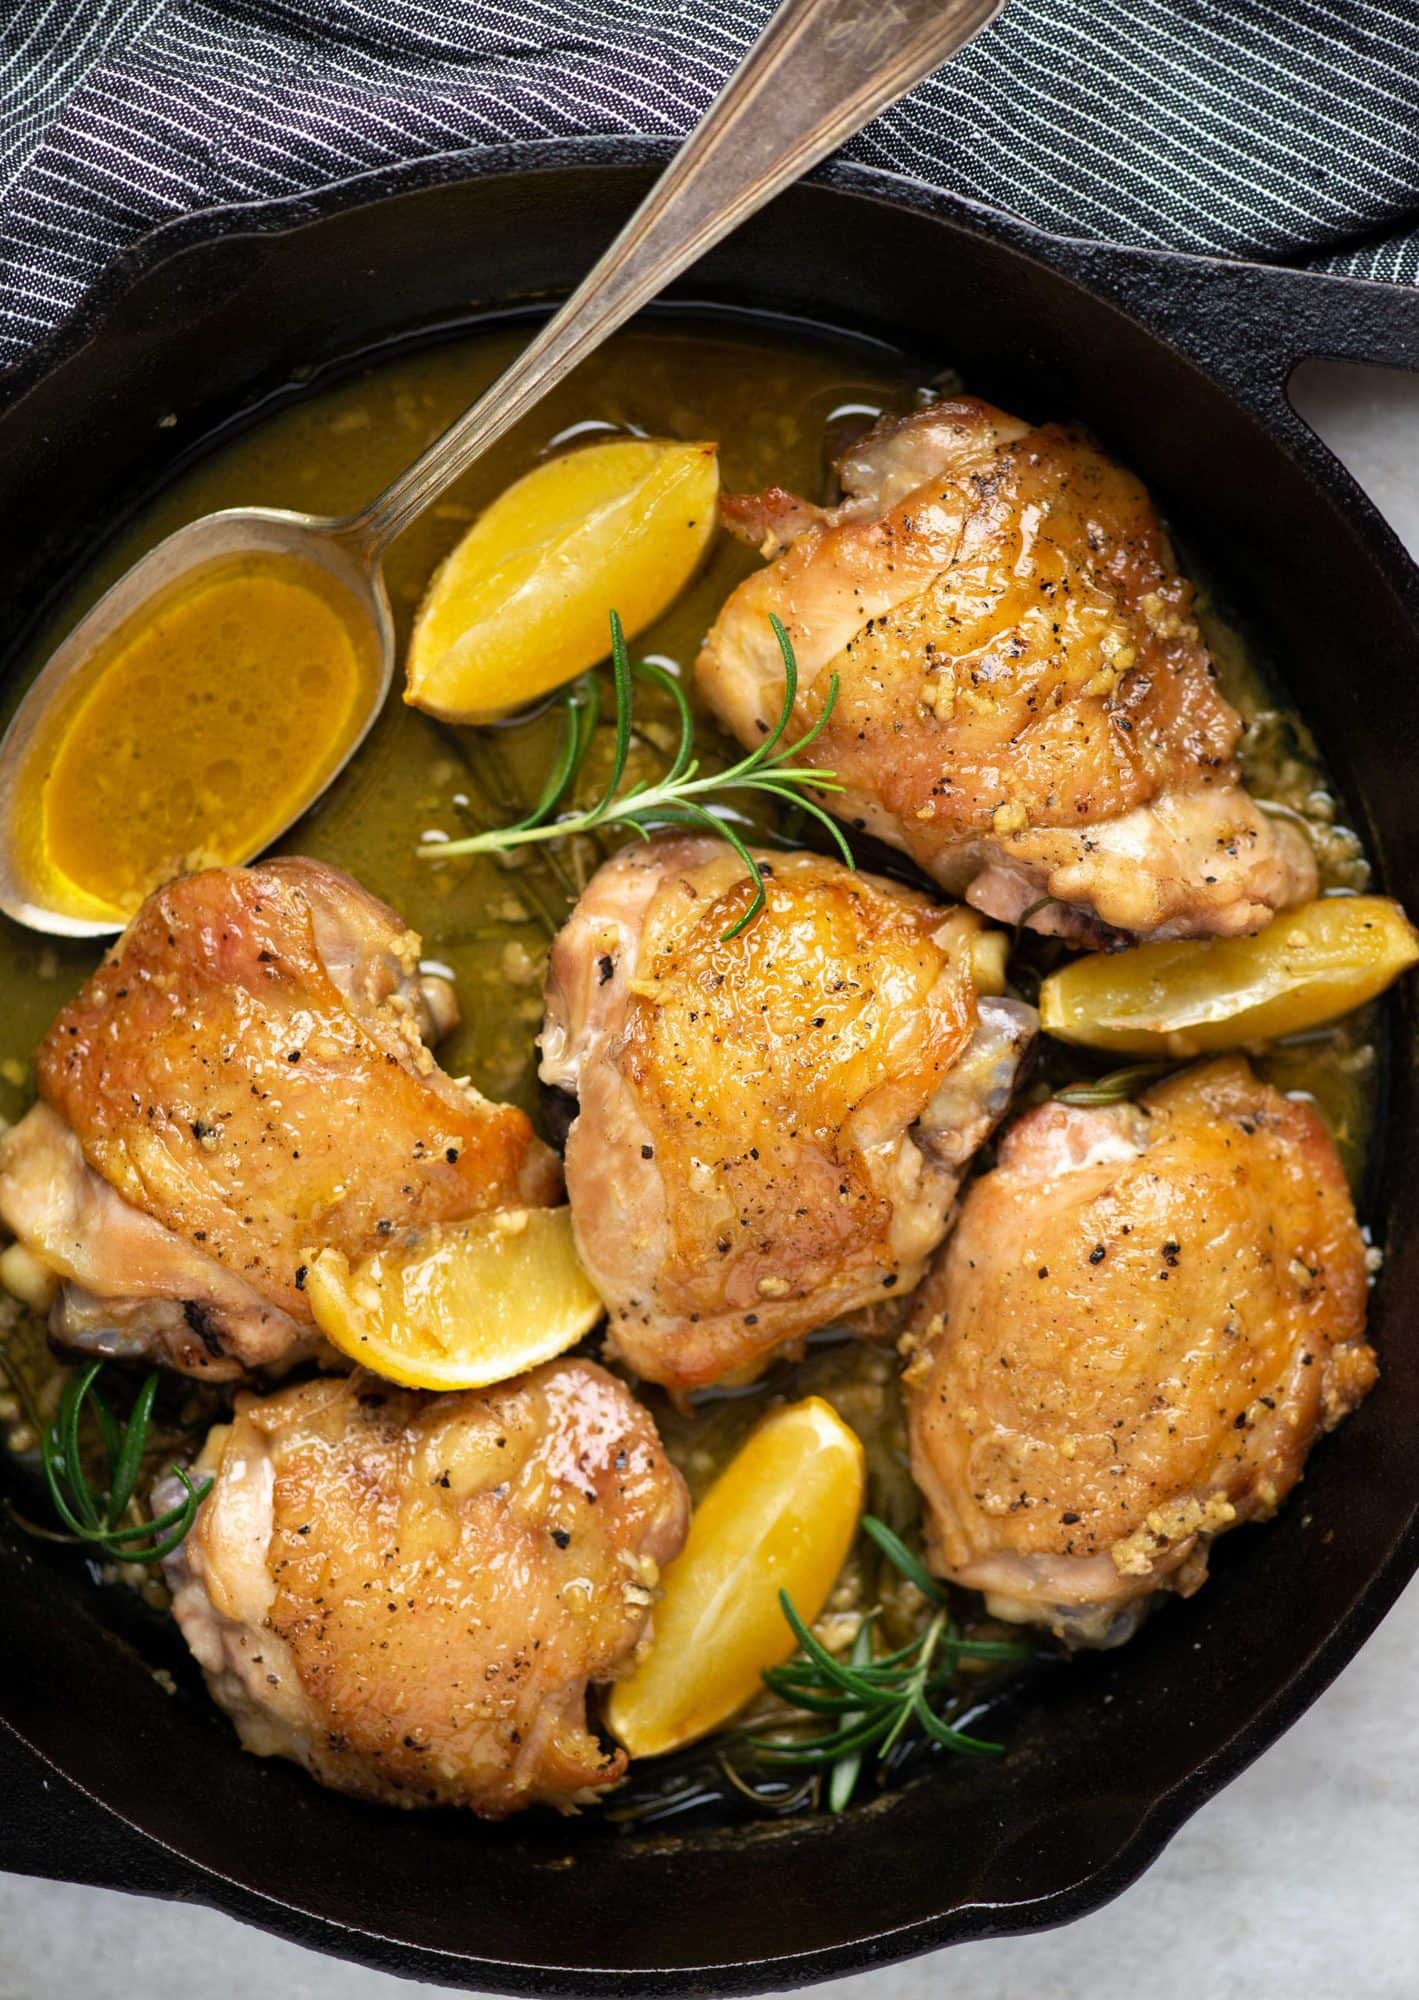 Rosemary infused lemon garlic butter sauce around baked chicken thighs with crispy skin made in a skillet and finished in the oven. 